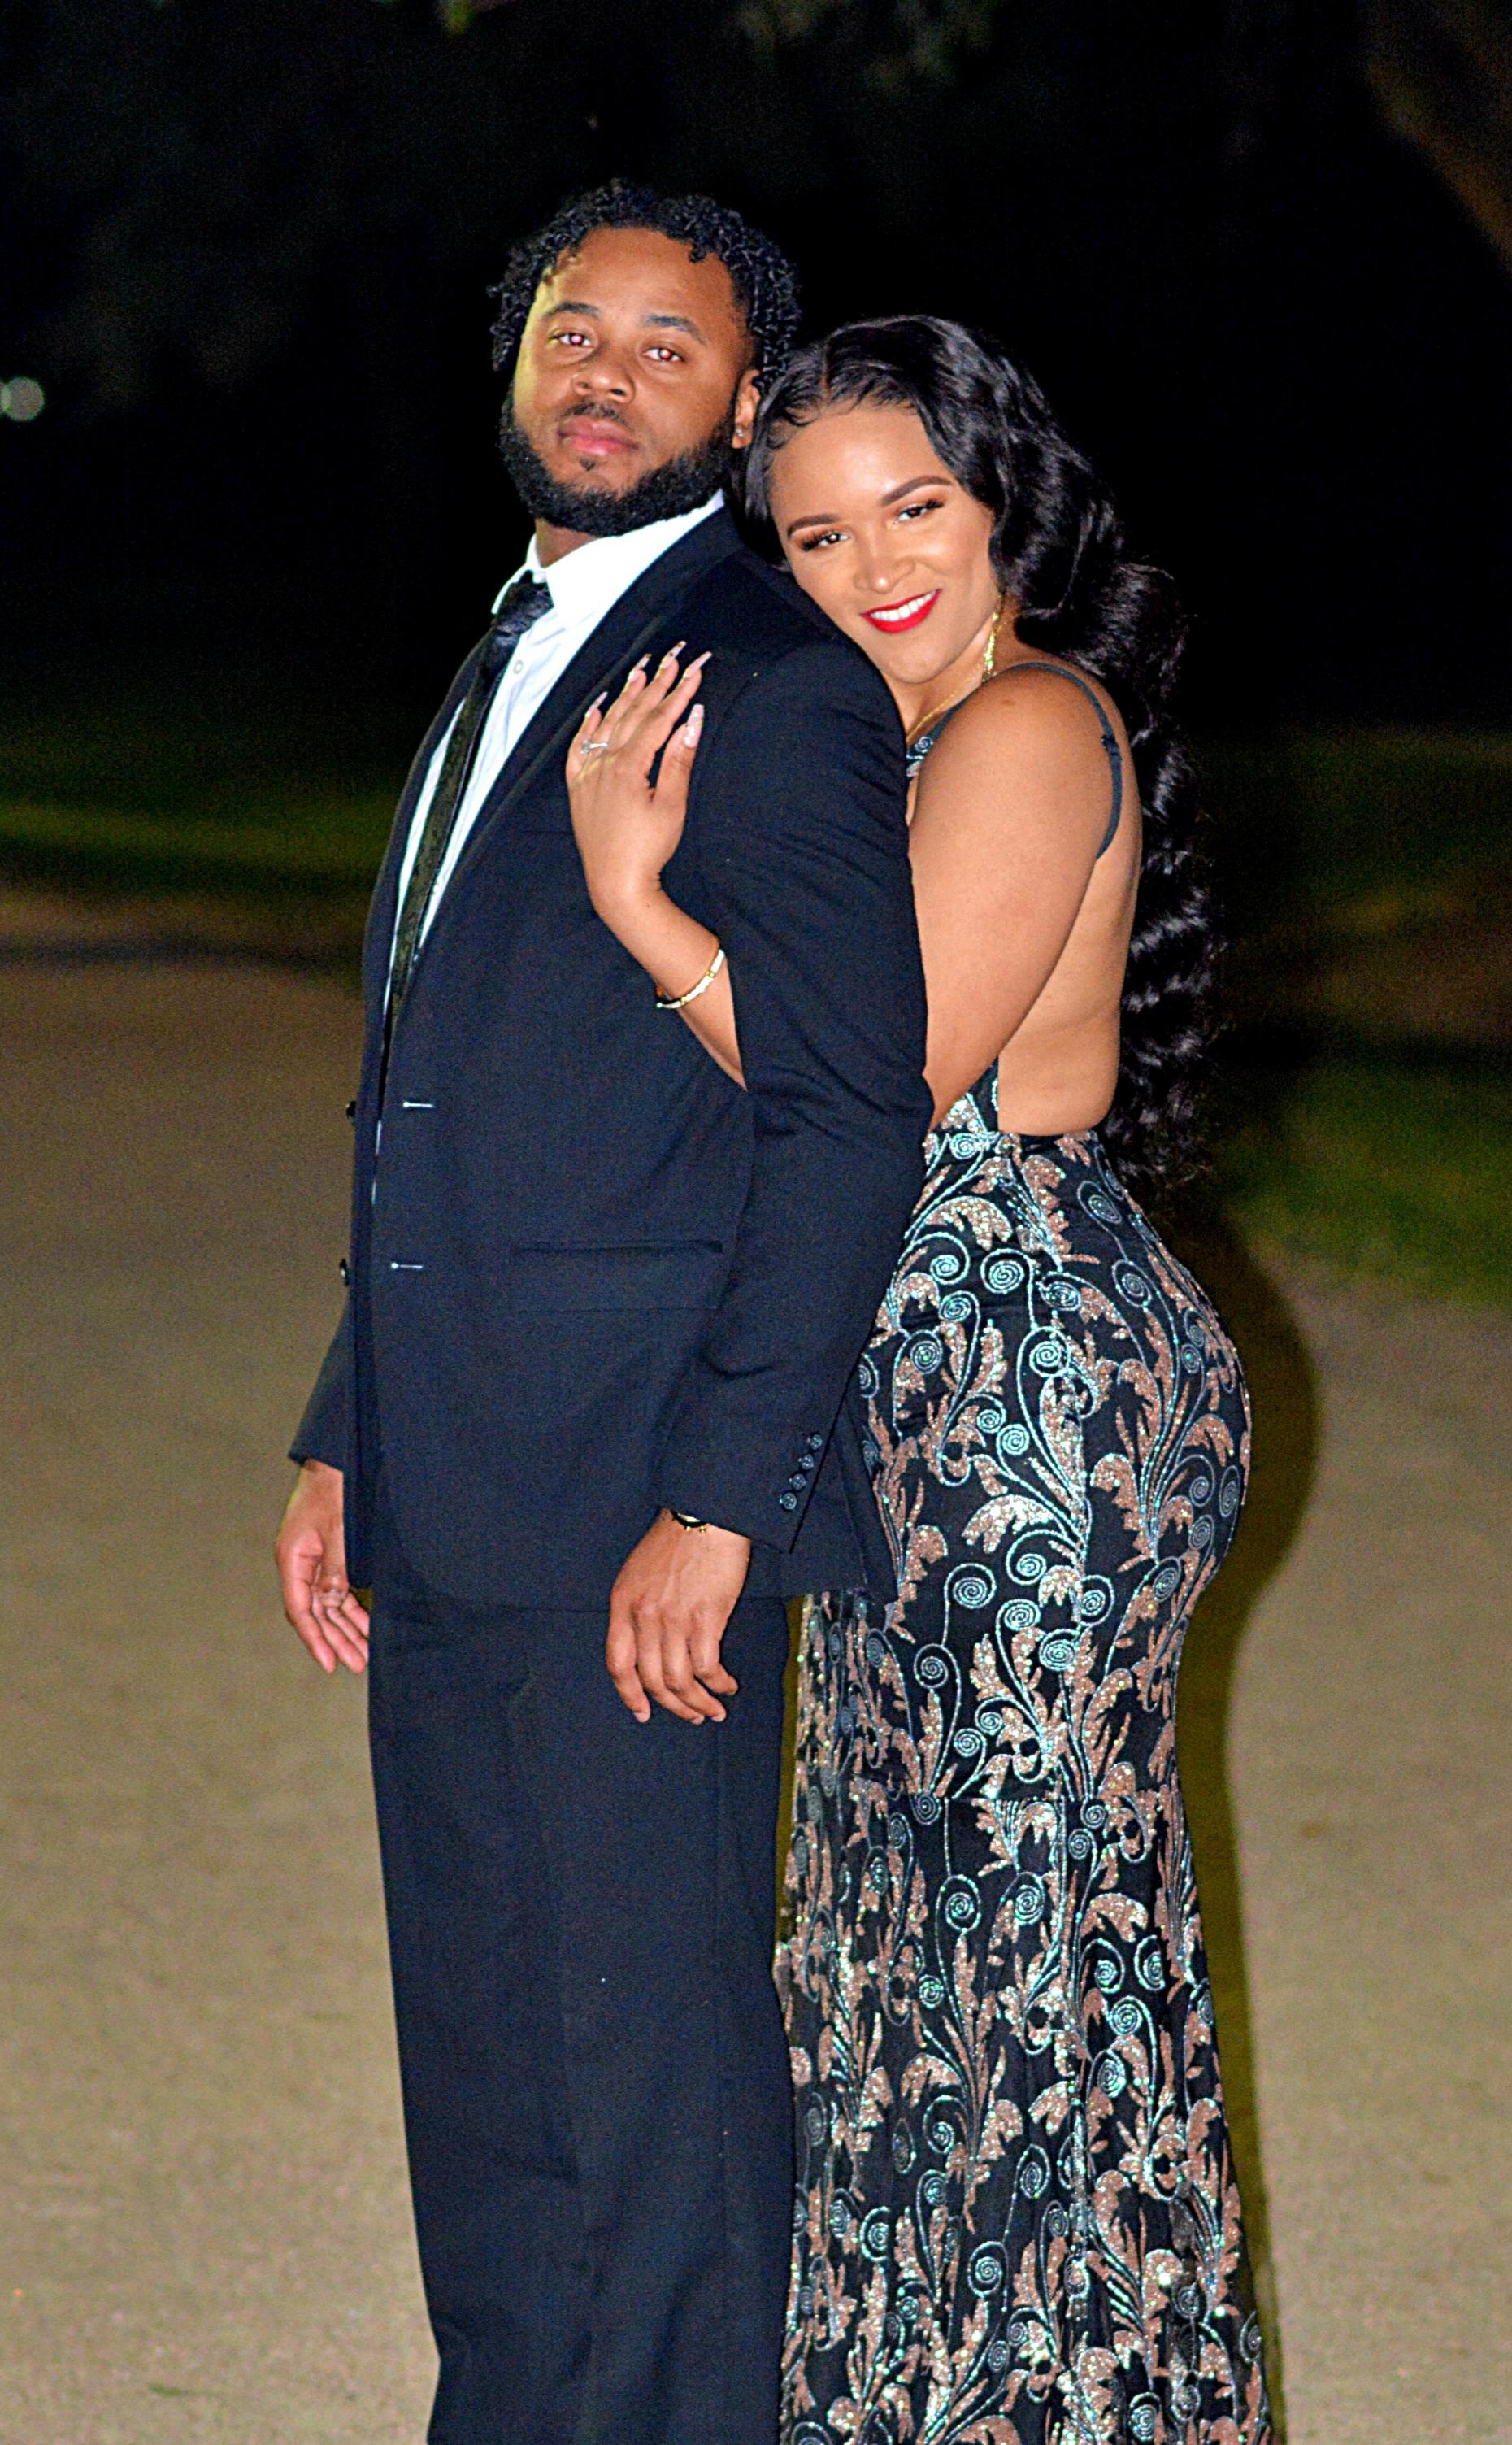 The Wedding Website of Brittany Simon and Javone Lawson